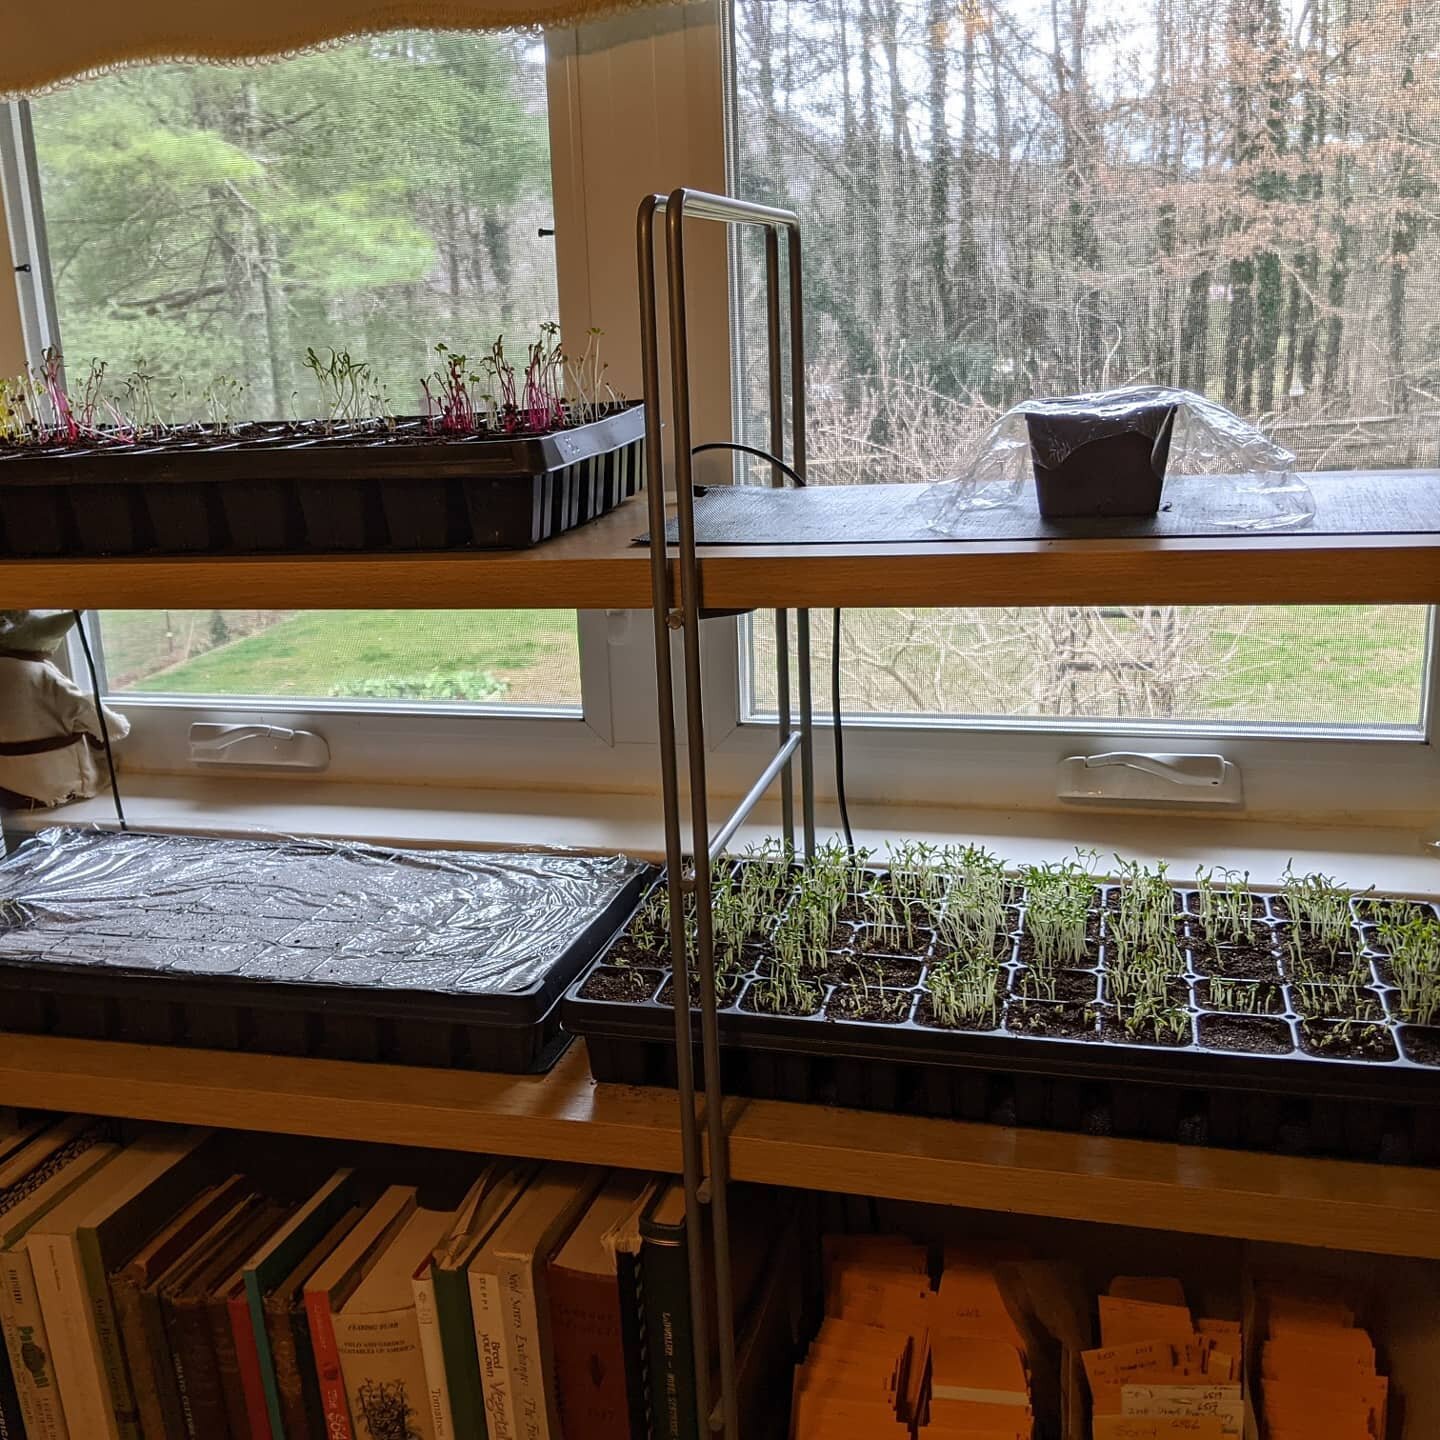 Seedlings everywhere! Most everything is germinating quickly and well. No more heat under the 2 uncovered flats. I'll be easing them outdoors on mild days very soon, and getting lights set up in the garage as well for just in case use. From now until